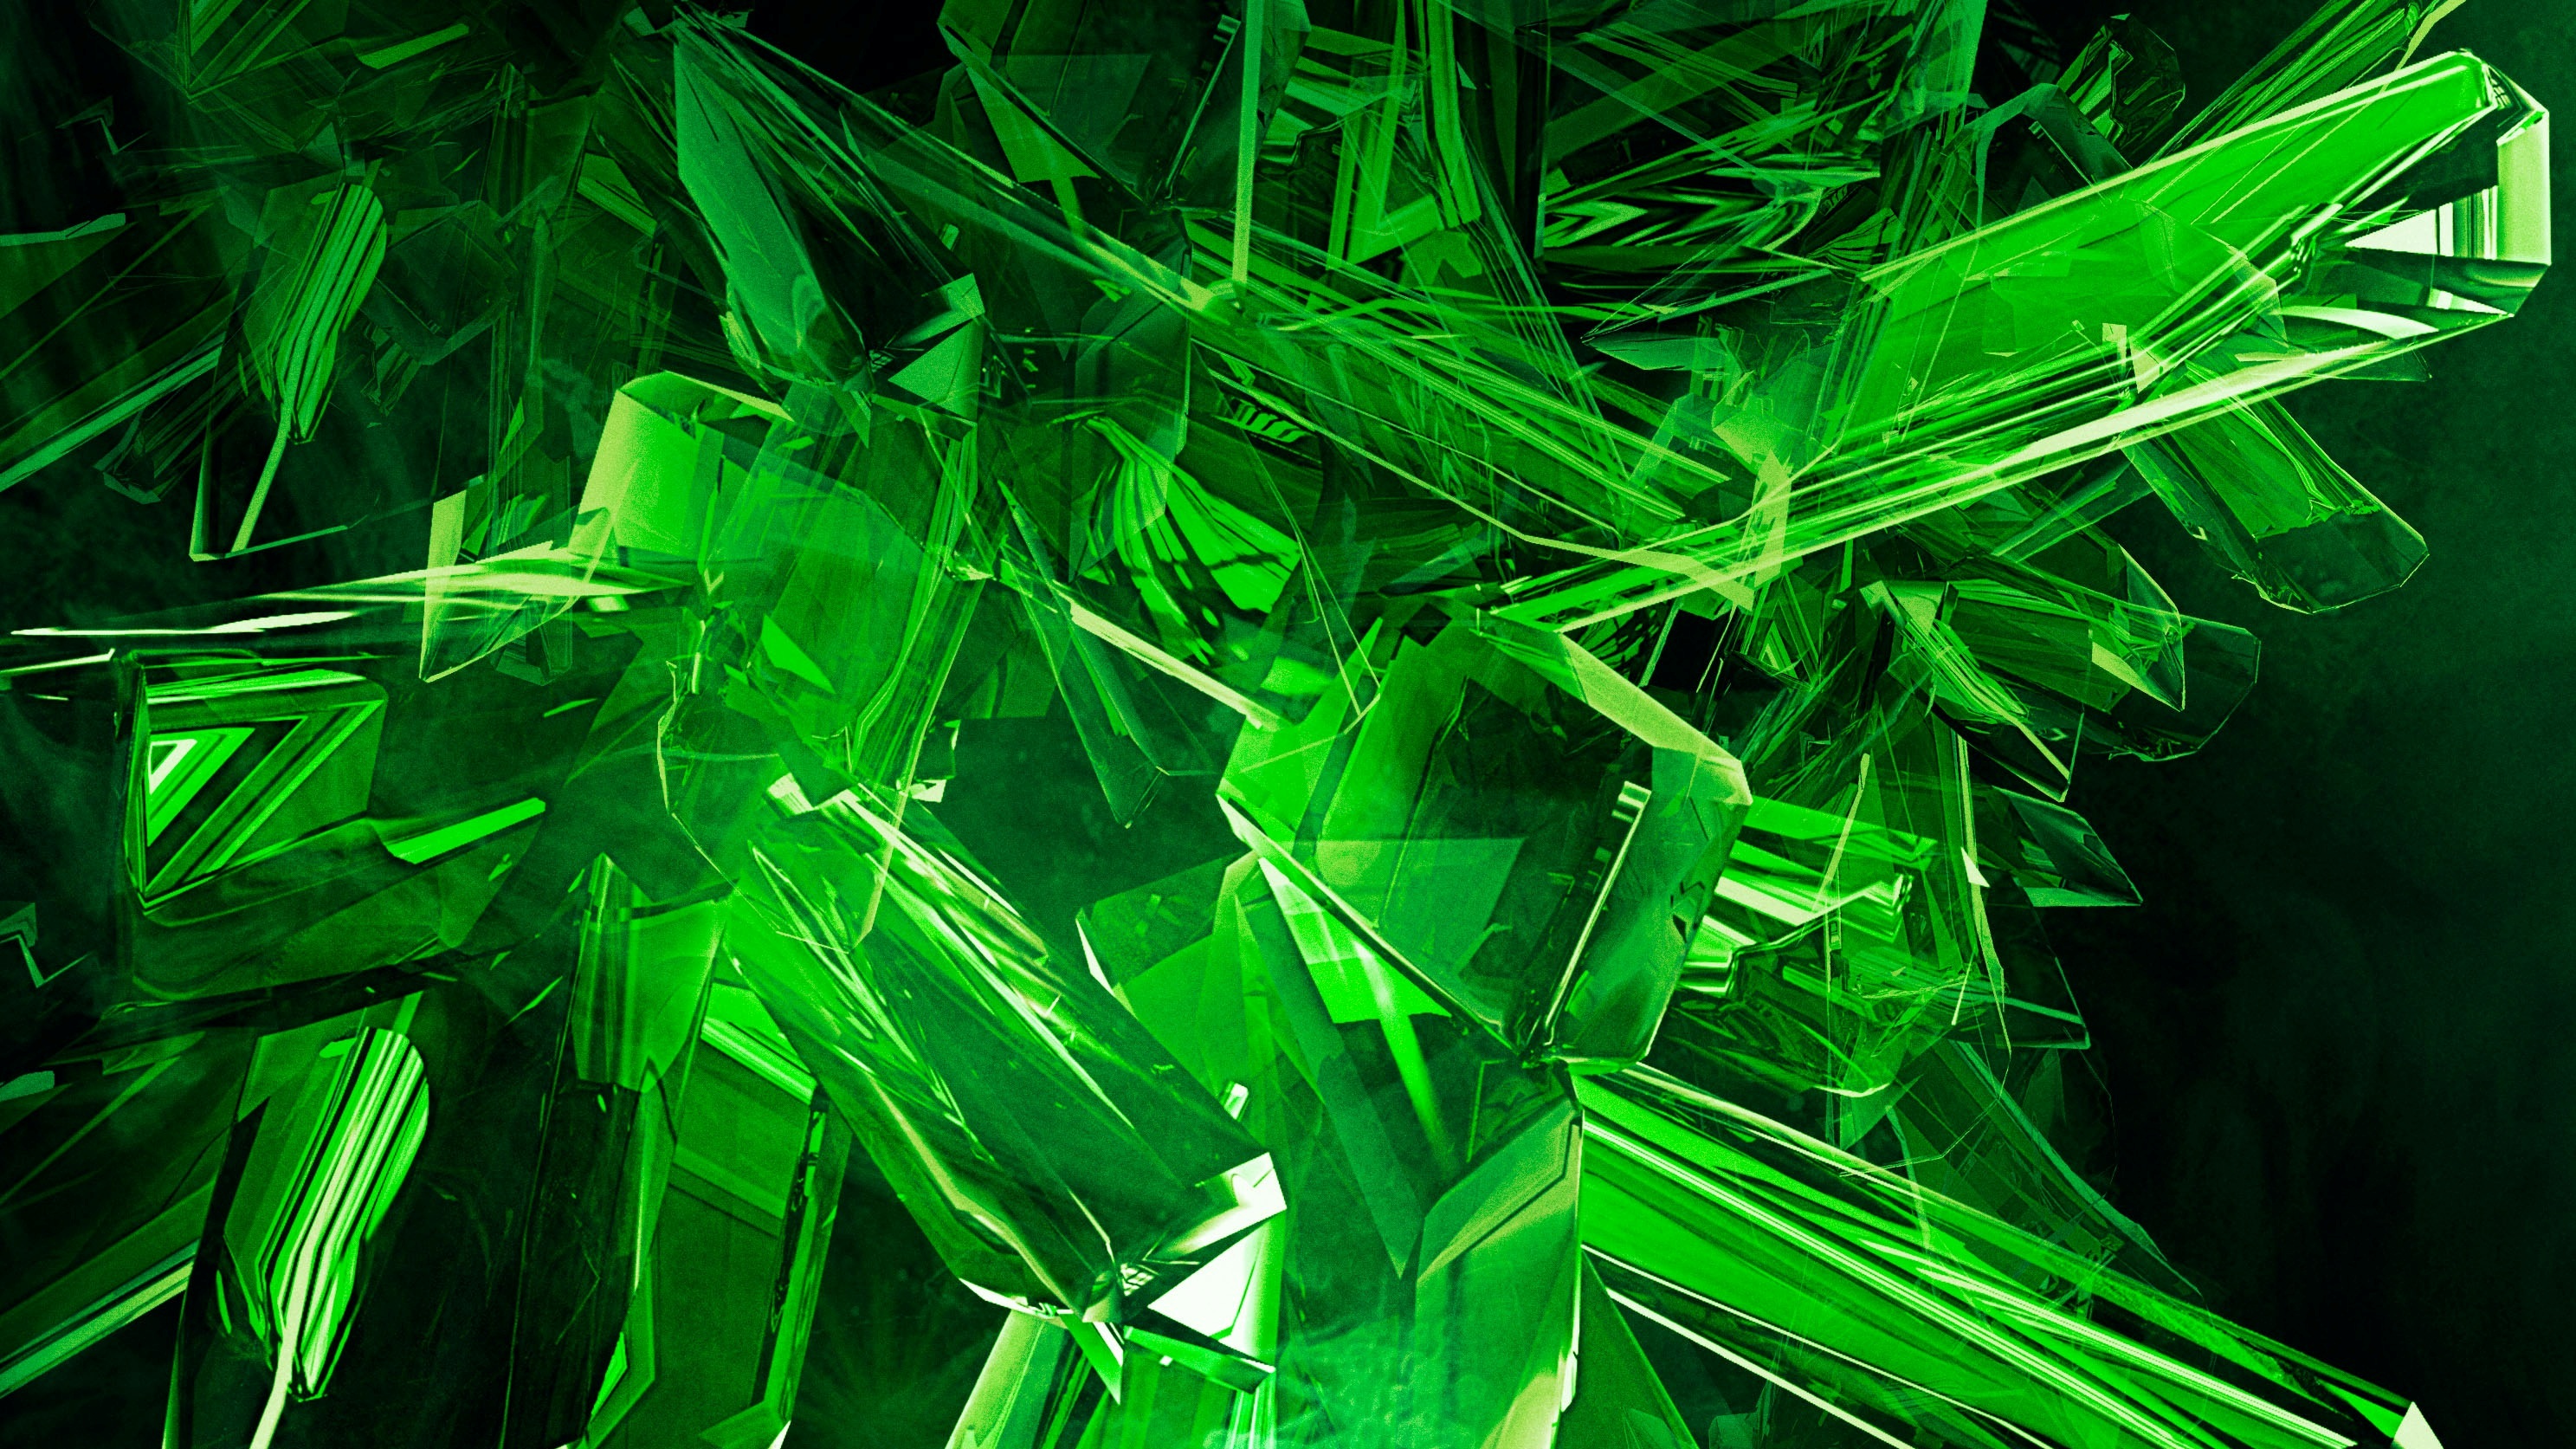 HD Wallpaper Image Green Abstract Gems Cool